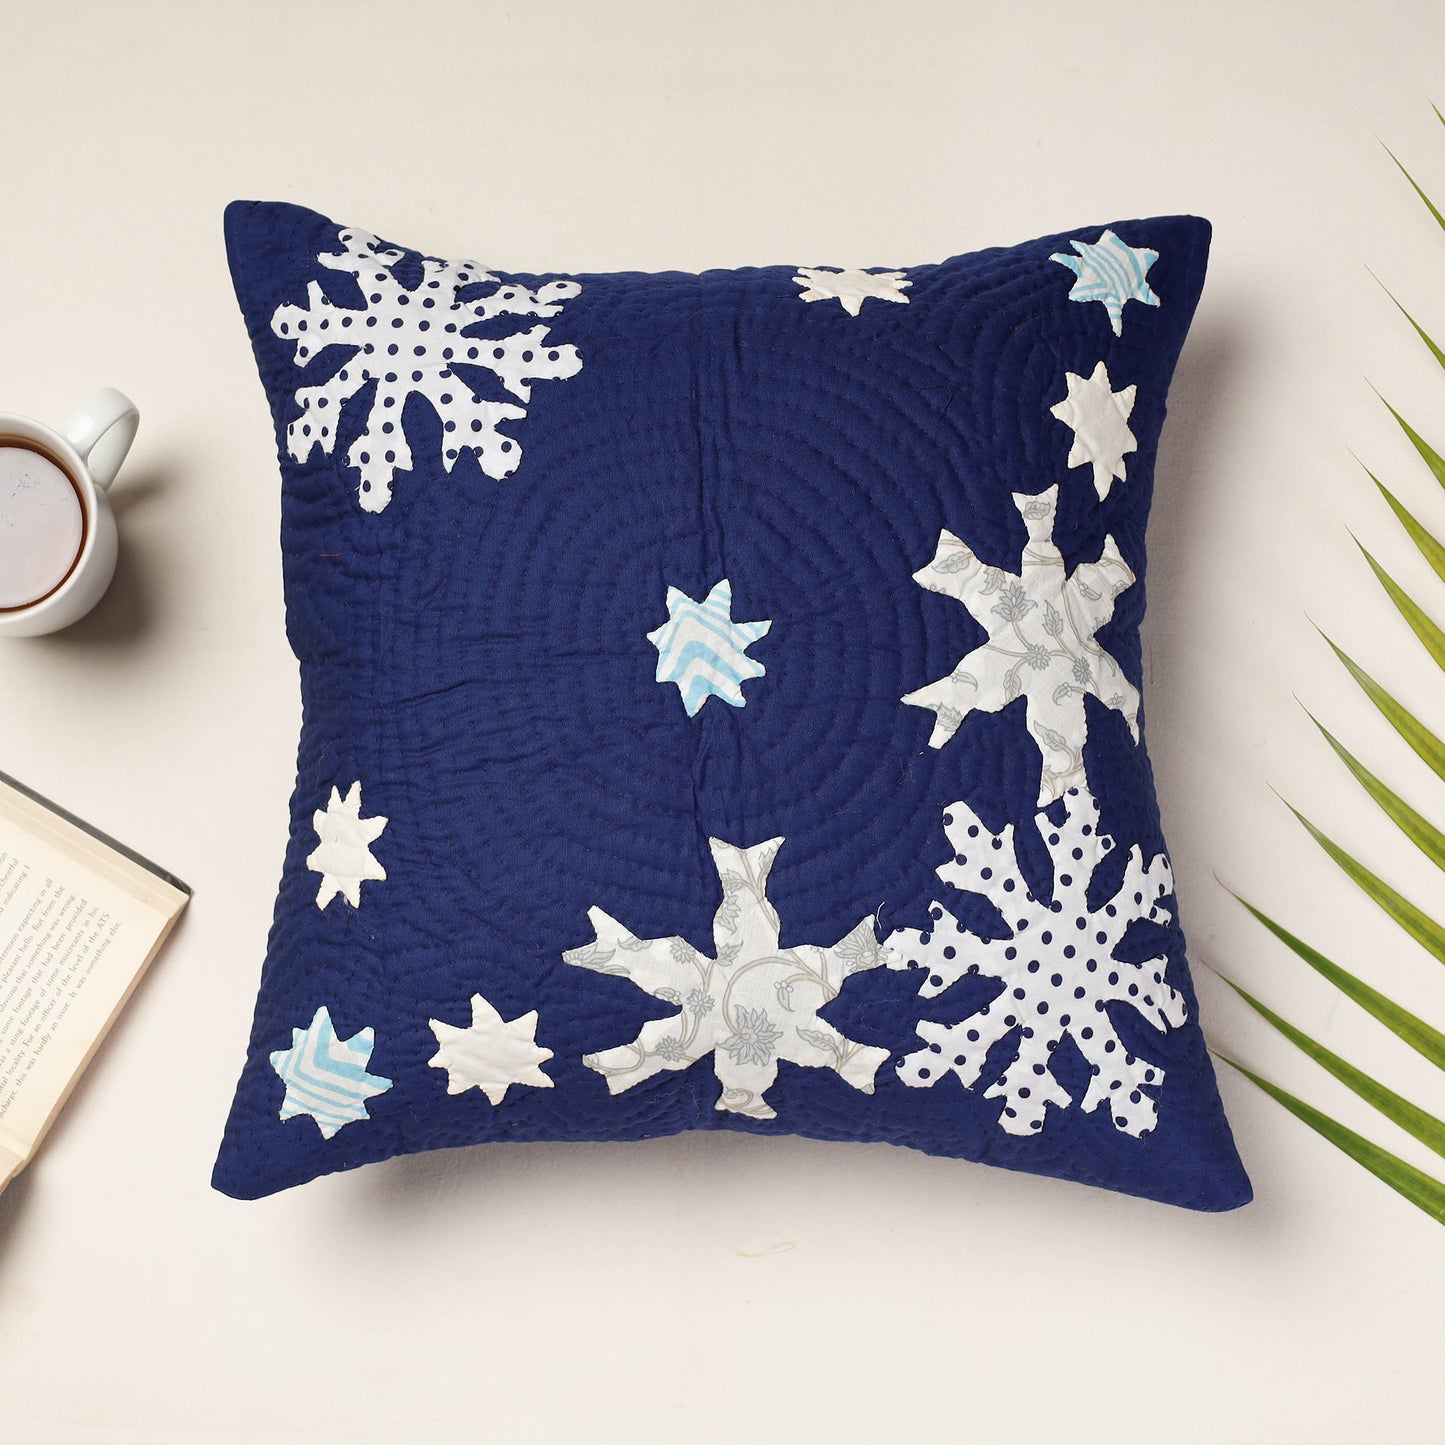 Blue - Applique Quilted Cotton Cushion Cover (16 x 16 in)